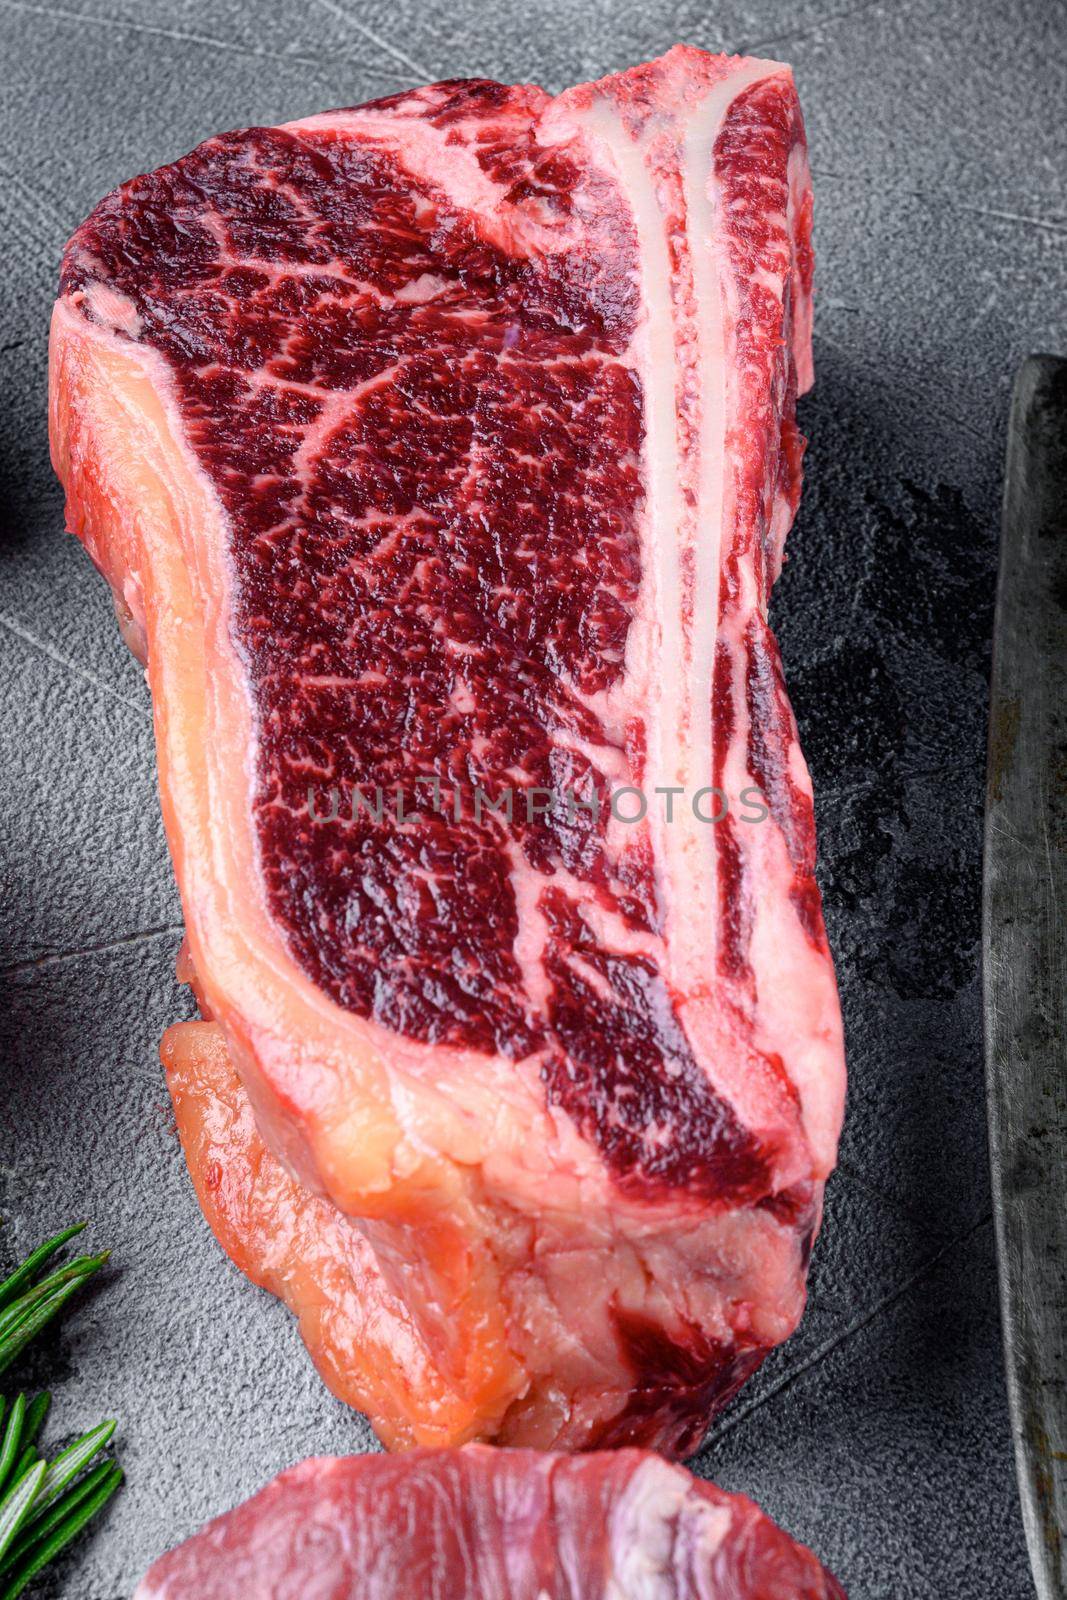 Club steak raw marbled beef meat set, on gray stone background